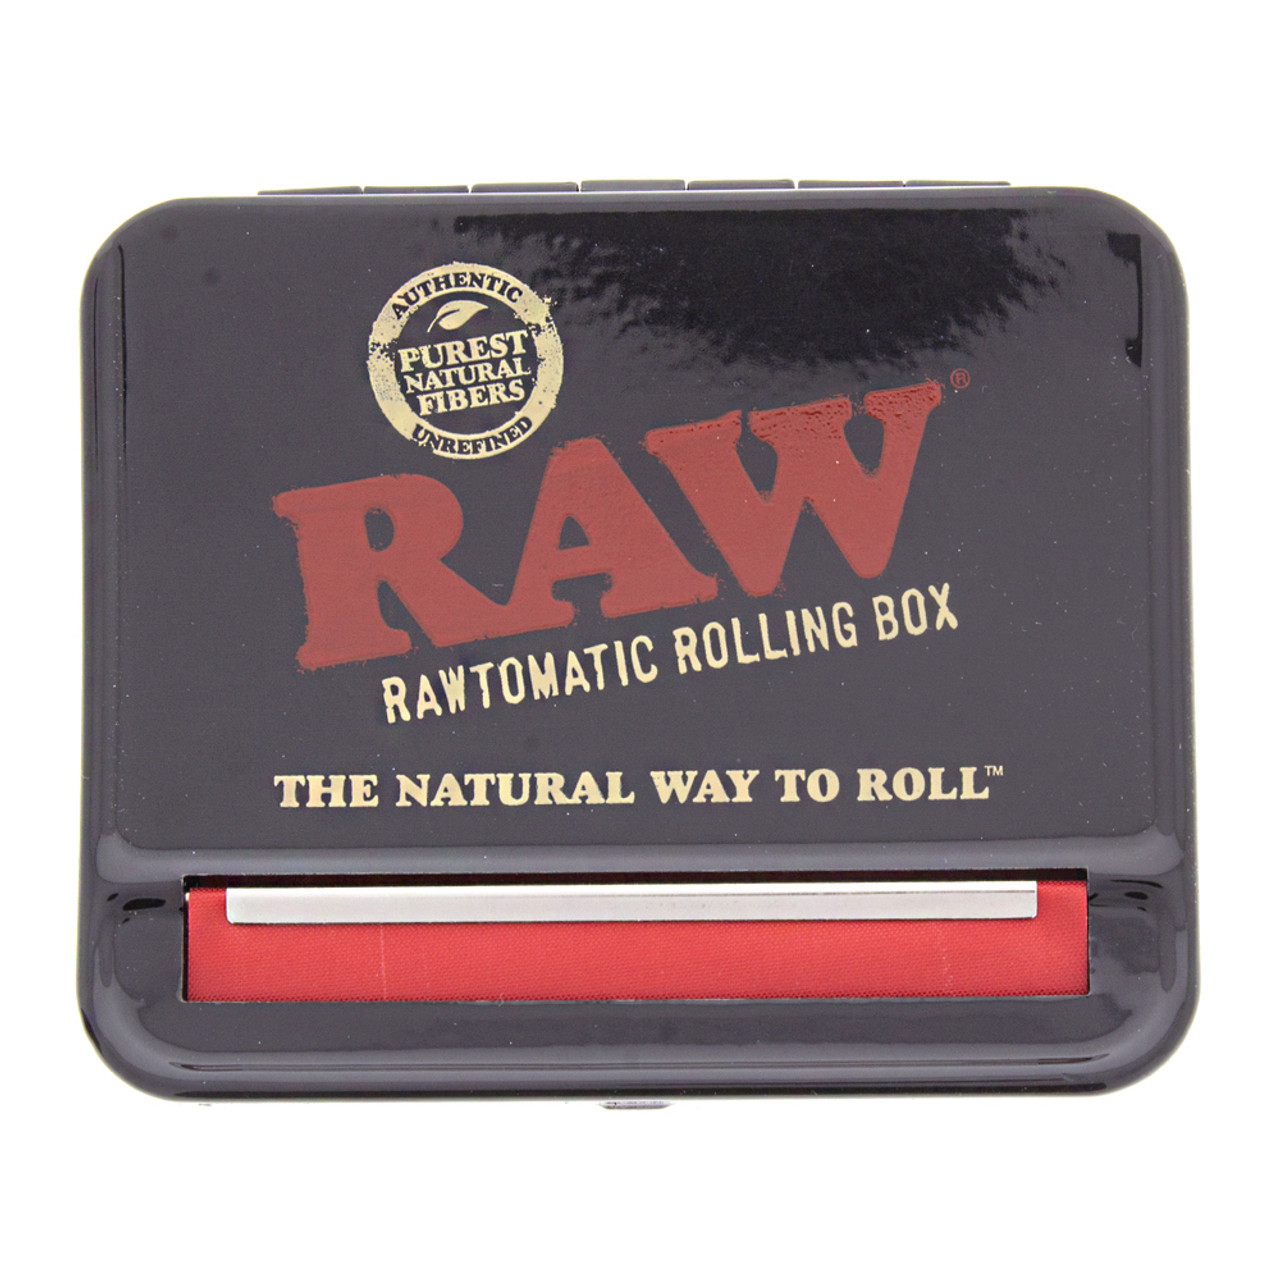  RAW Rolling TRAY KIT or SET King Size + TRAY +